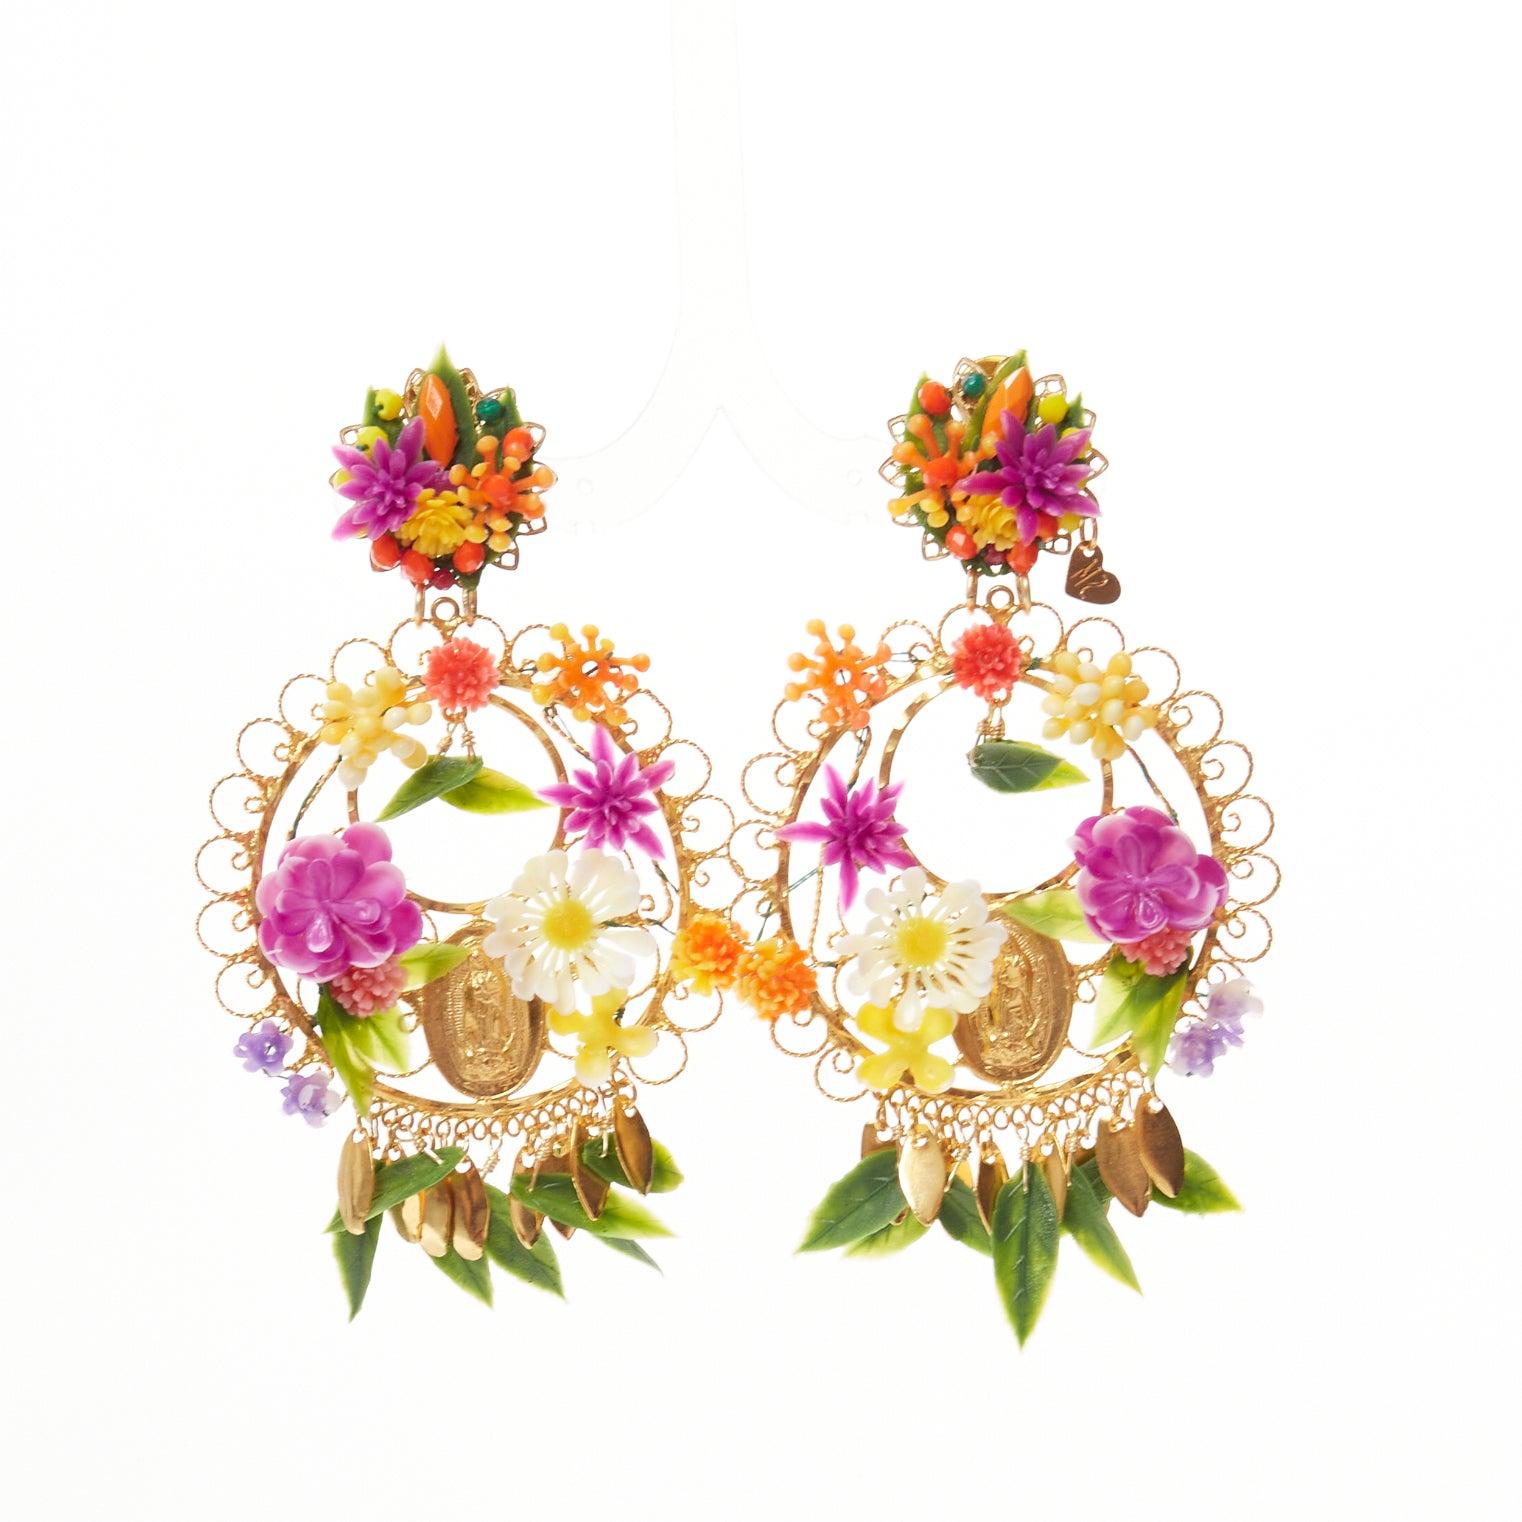 MERCEDES SALAZAR multicolour plastic flower gold rosary clip on earrings
Reference: AAWC/A01262
Brand: Mercedes Salazar
Material: Metal, Plastic
Color: Gold, Multicolour
Pattern: Floral
Closure: Clip On
Lining: Gold Metal

CONDITION:
Condition: Very